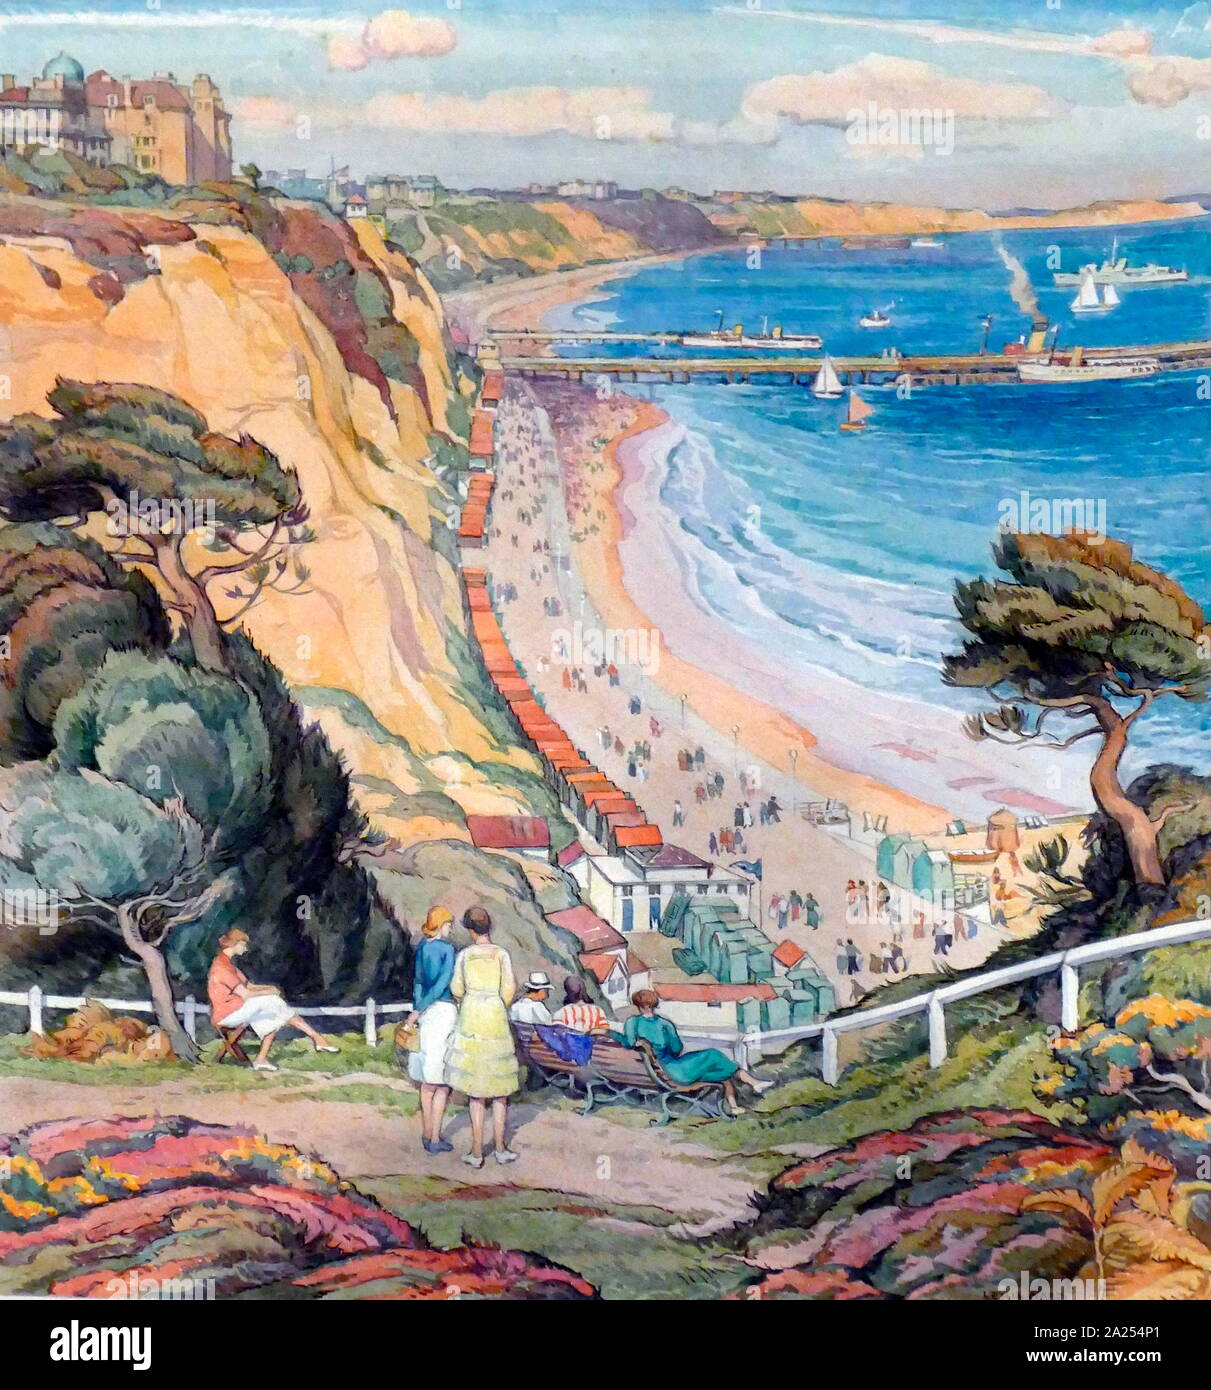 The Bay from Durley Chine, 1920-1930. Painted by Leslie Moffatt Ward (1888-1978). Watercolour on paper Stock Photo